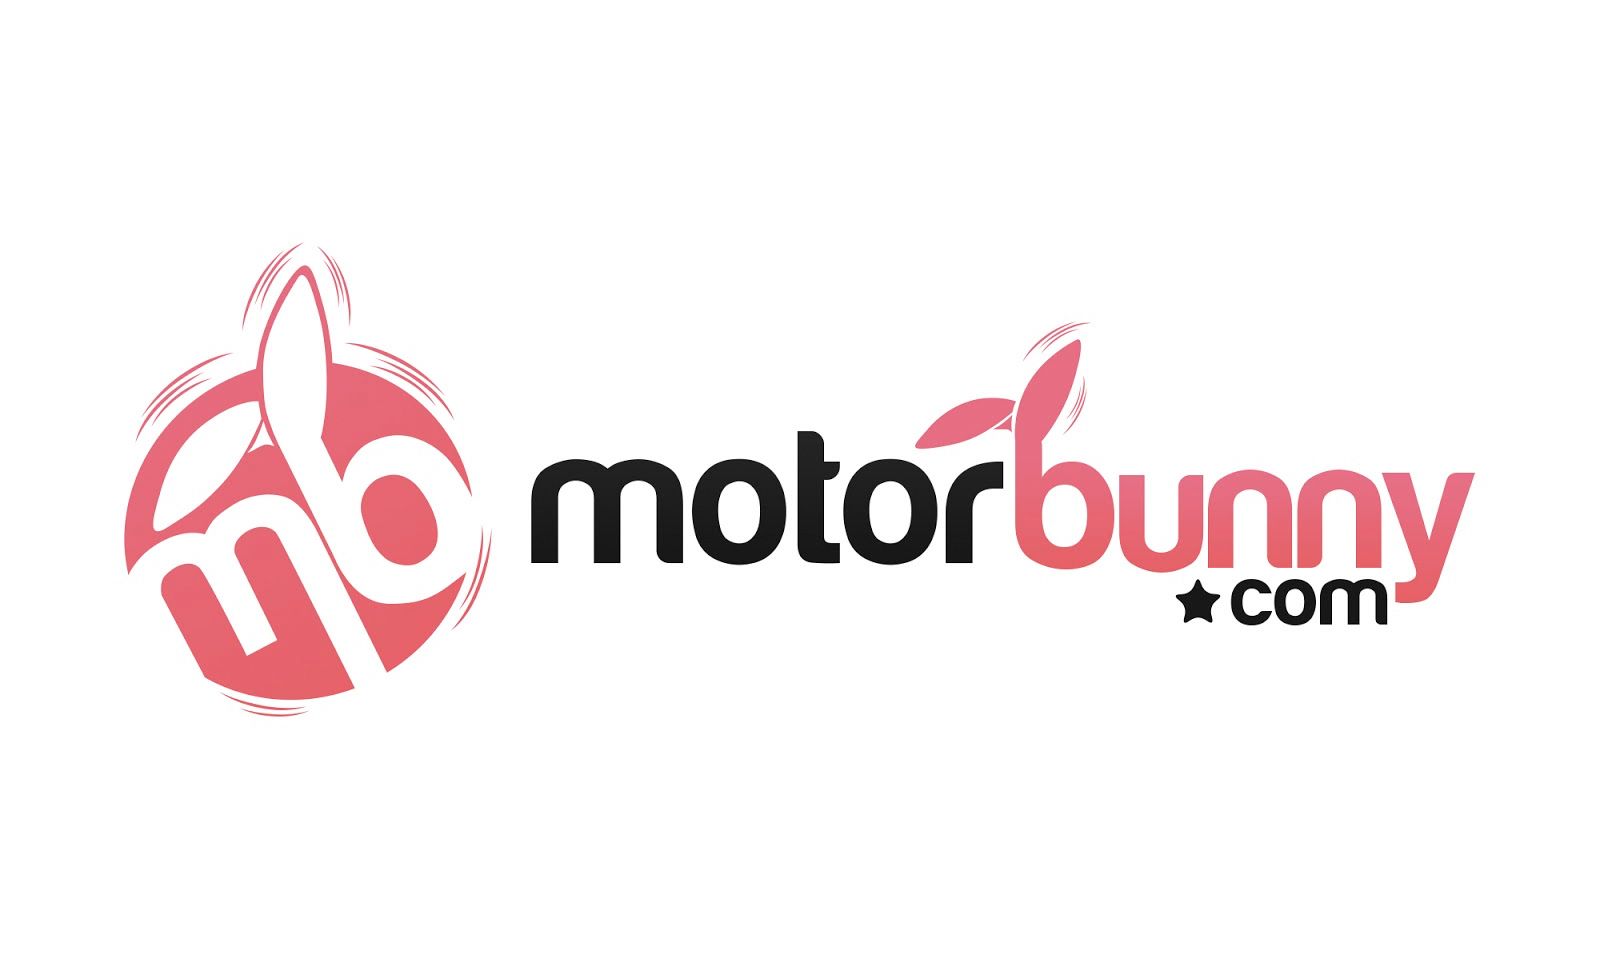 Motorbunny Named Outstanding Powered Product at 2017 ‘O’ Awards